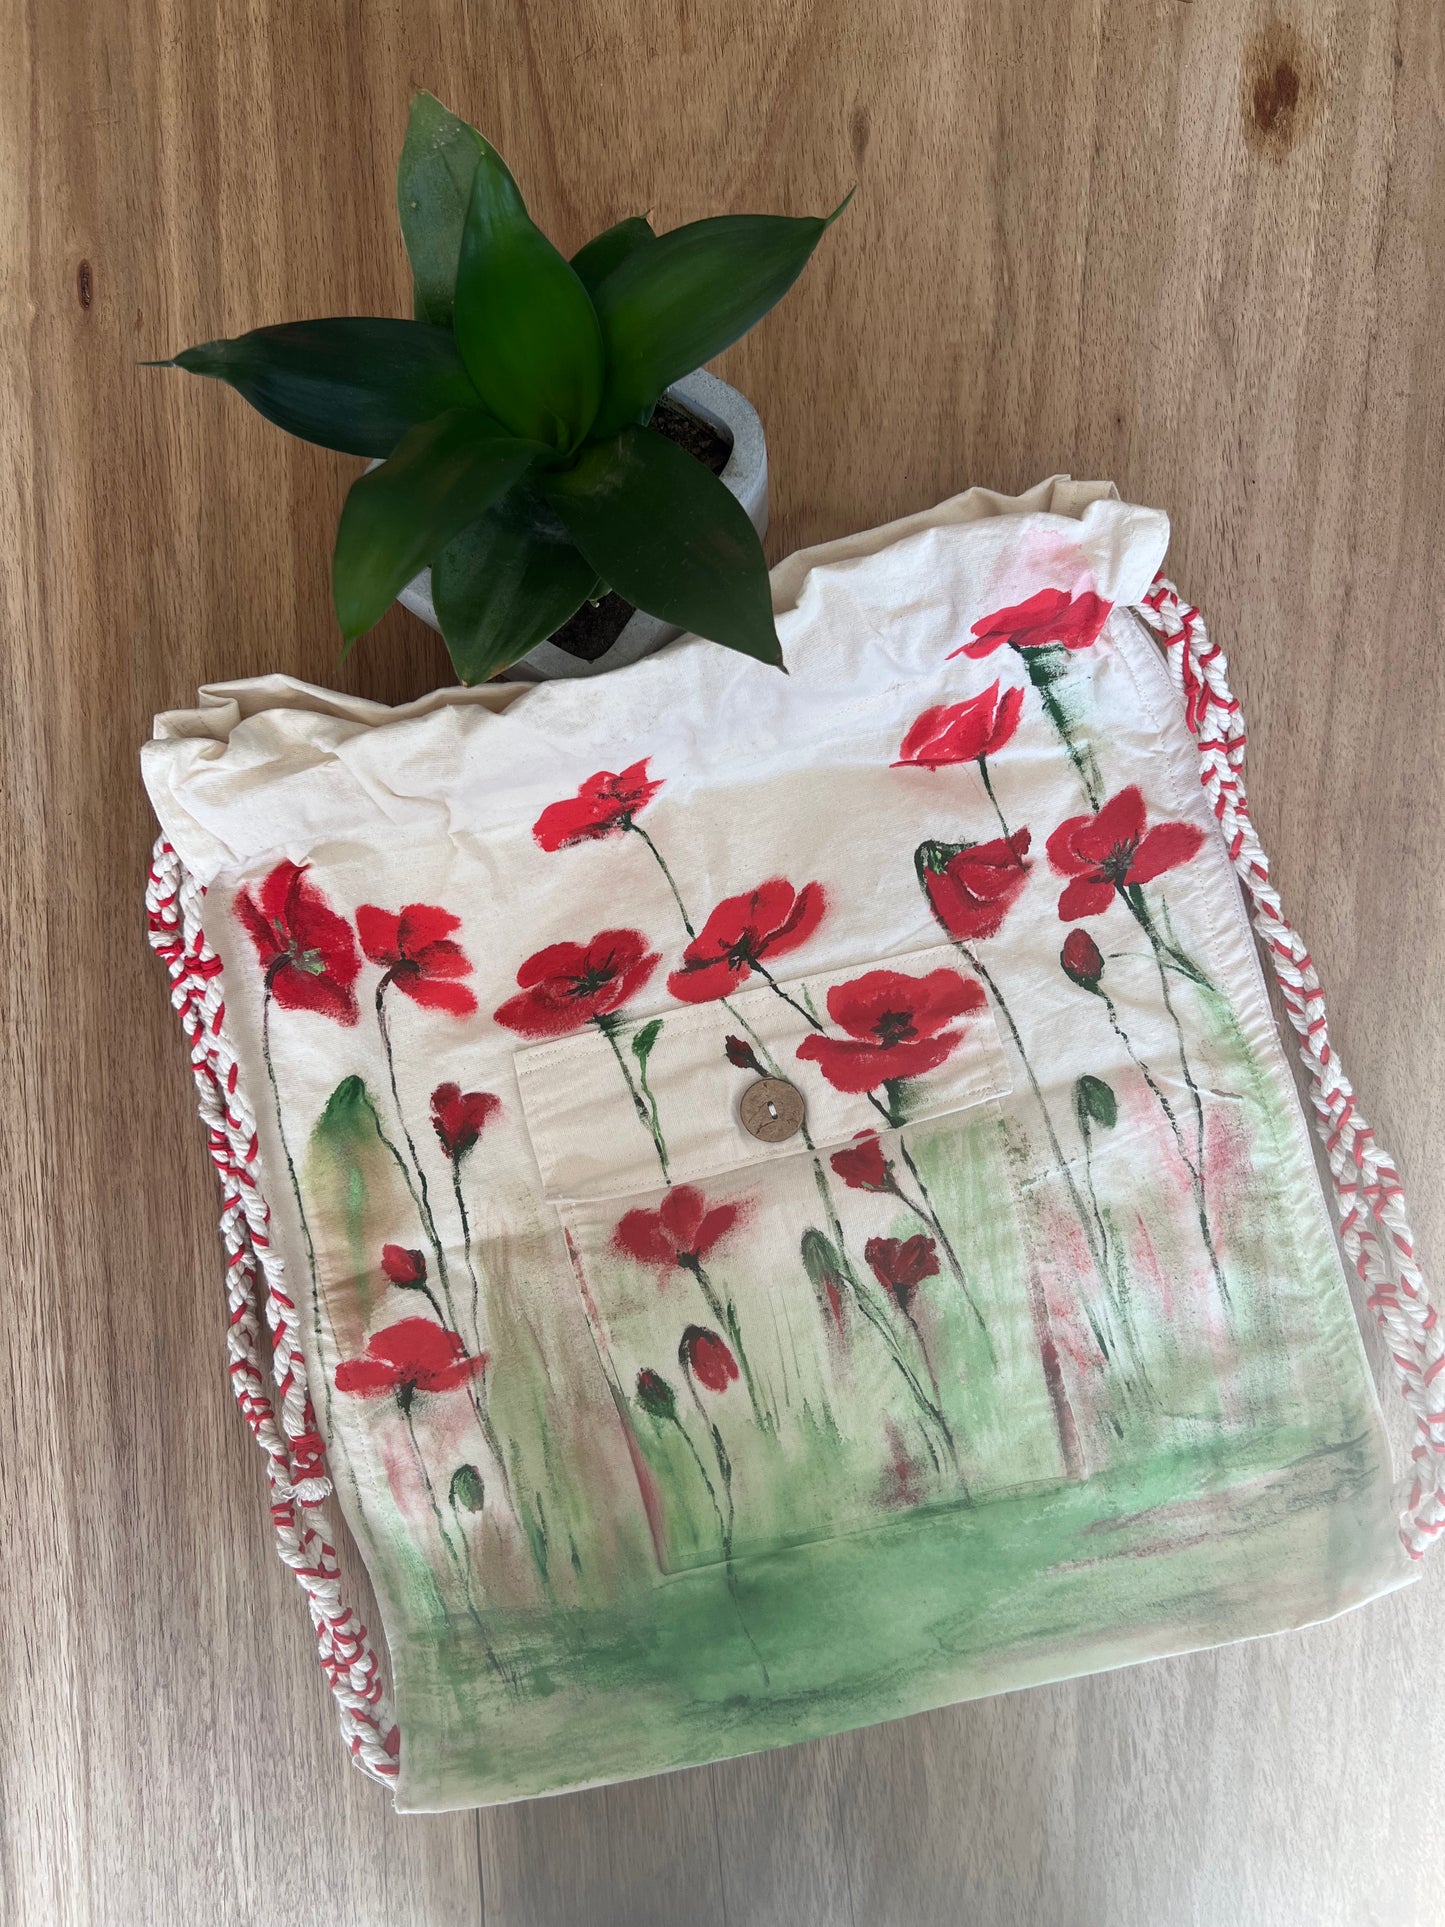 Poppy Meadow Wild Flower Painted Cotton Bag